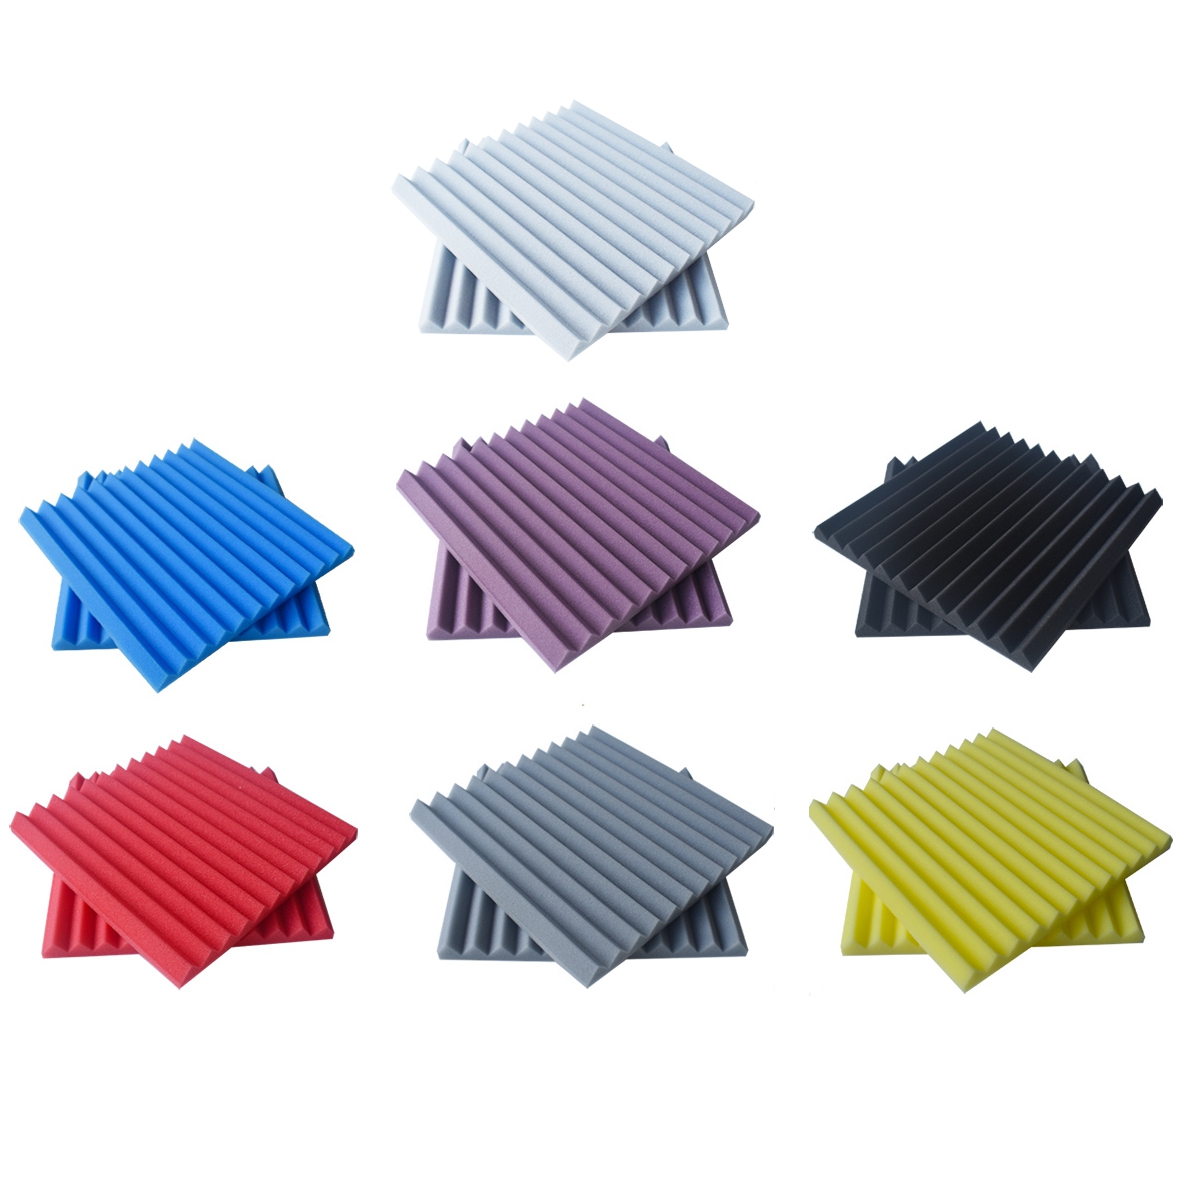 Find 6PCS Acoustic Foam Panel Sound Stop Absorption Sponge Studio KTV 25x25x2cm for Sale on Gipsybee.com with cryptocurrencies